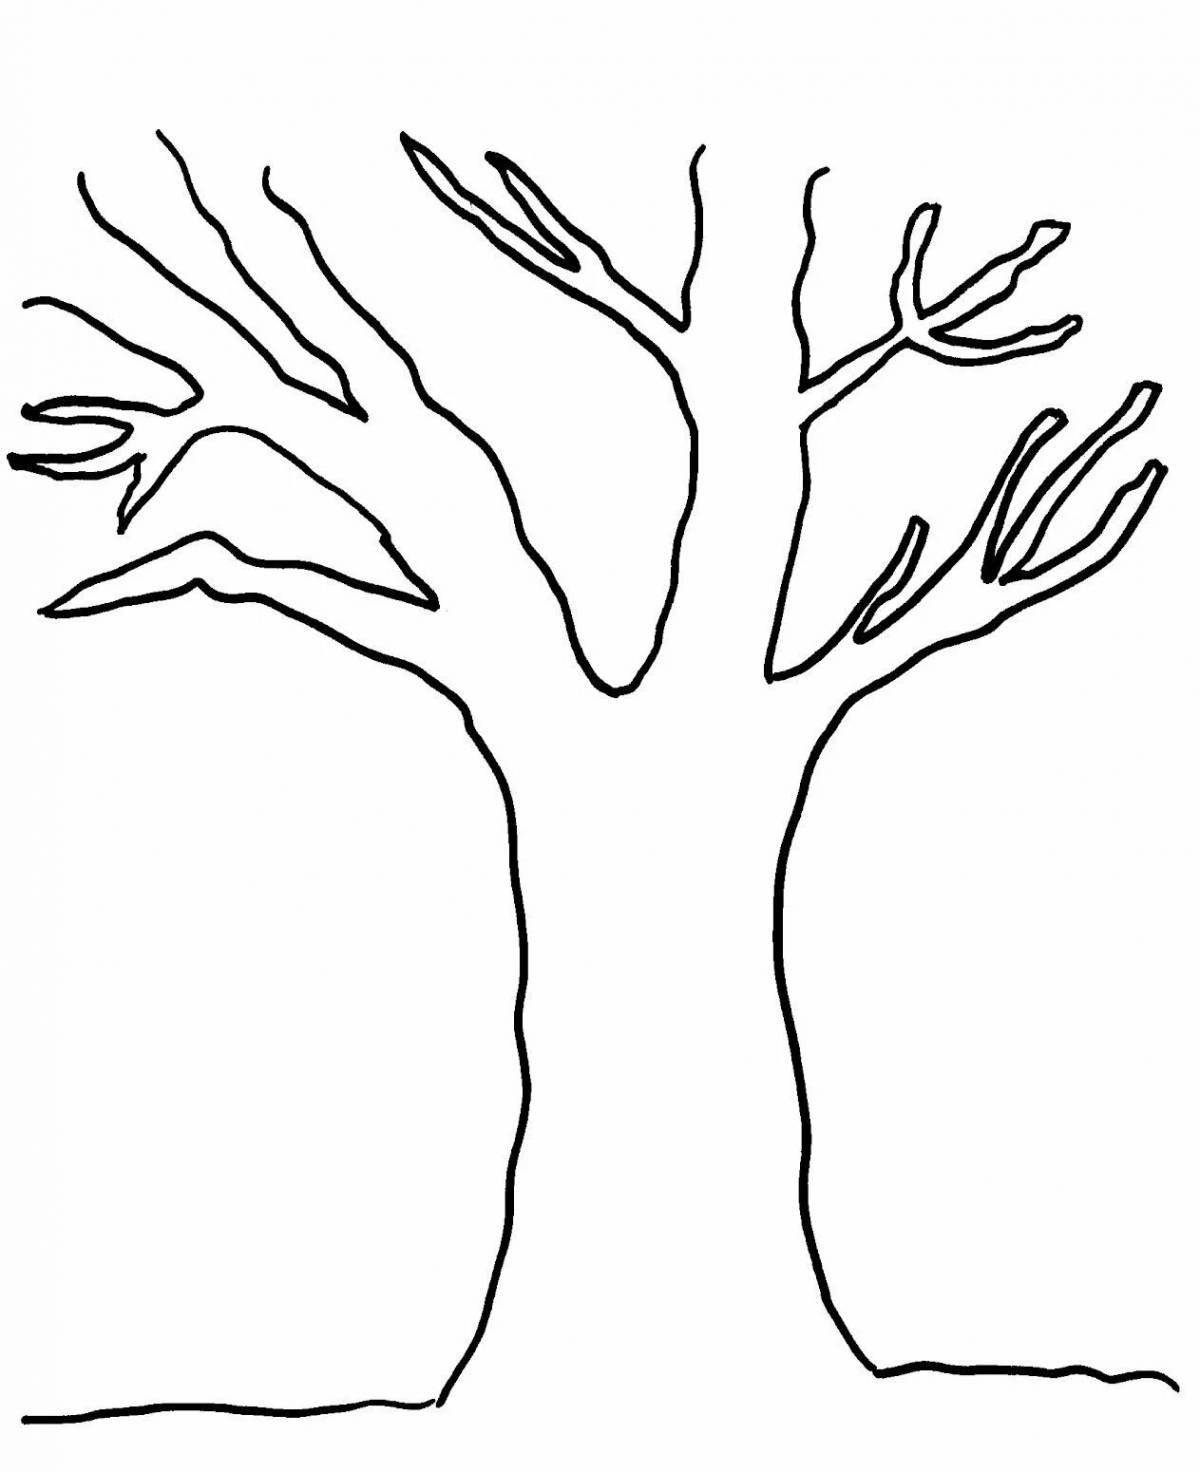 Coloring book magnificent branched tree